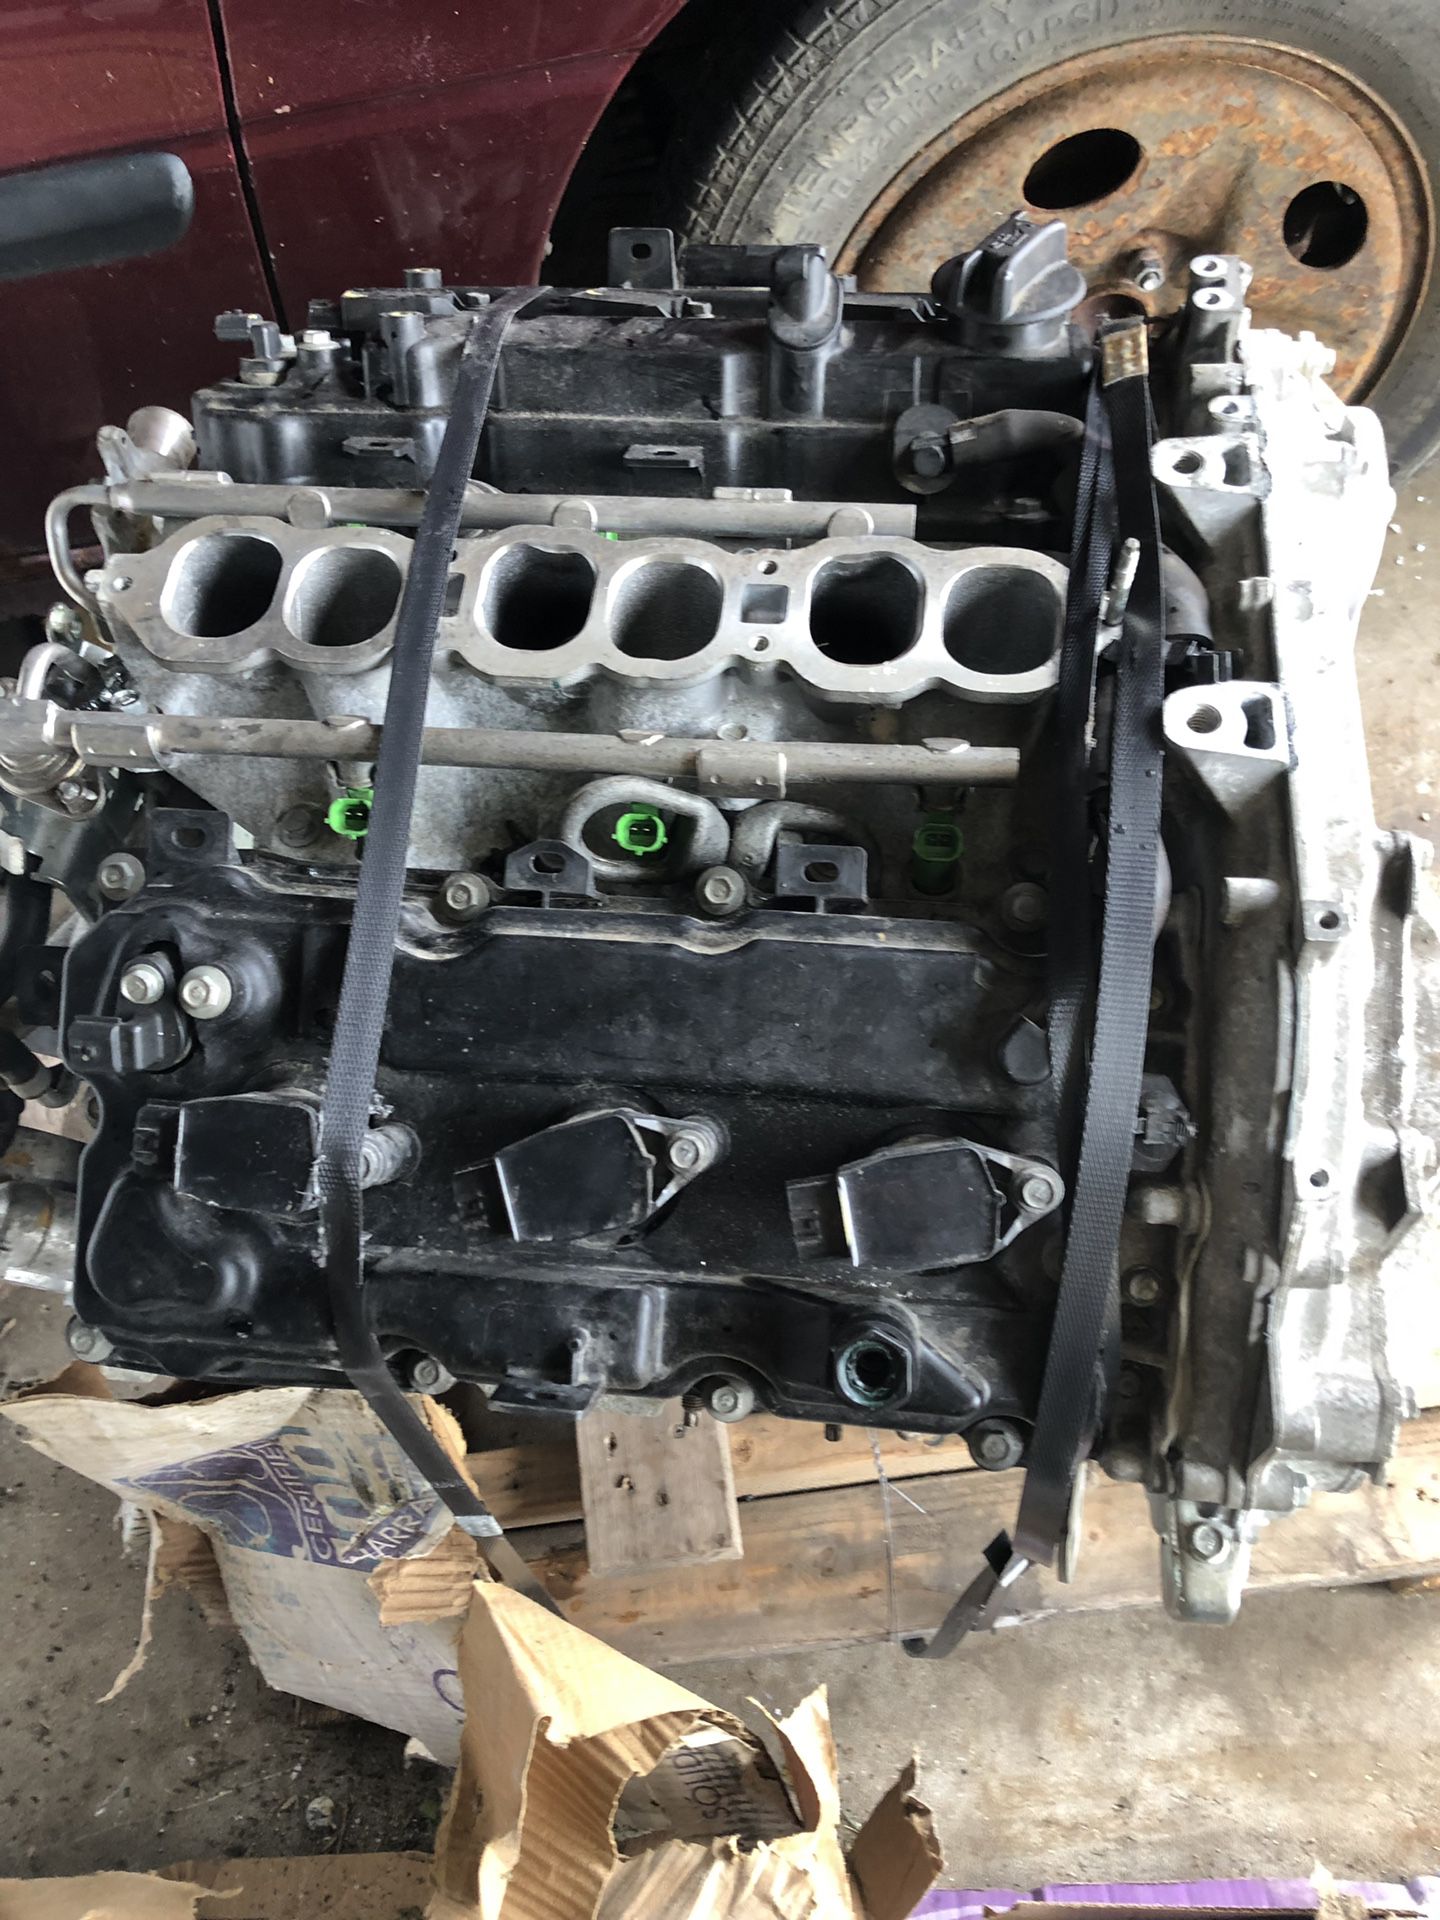 Infiniti Jx 35 2013 engine 15,000 miles for sale $1,500.00 almost brand new